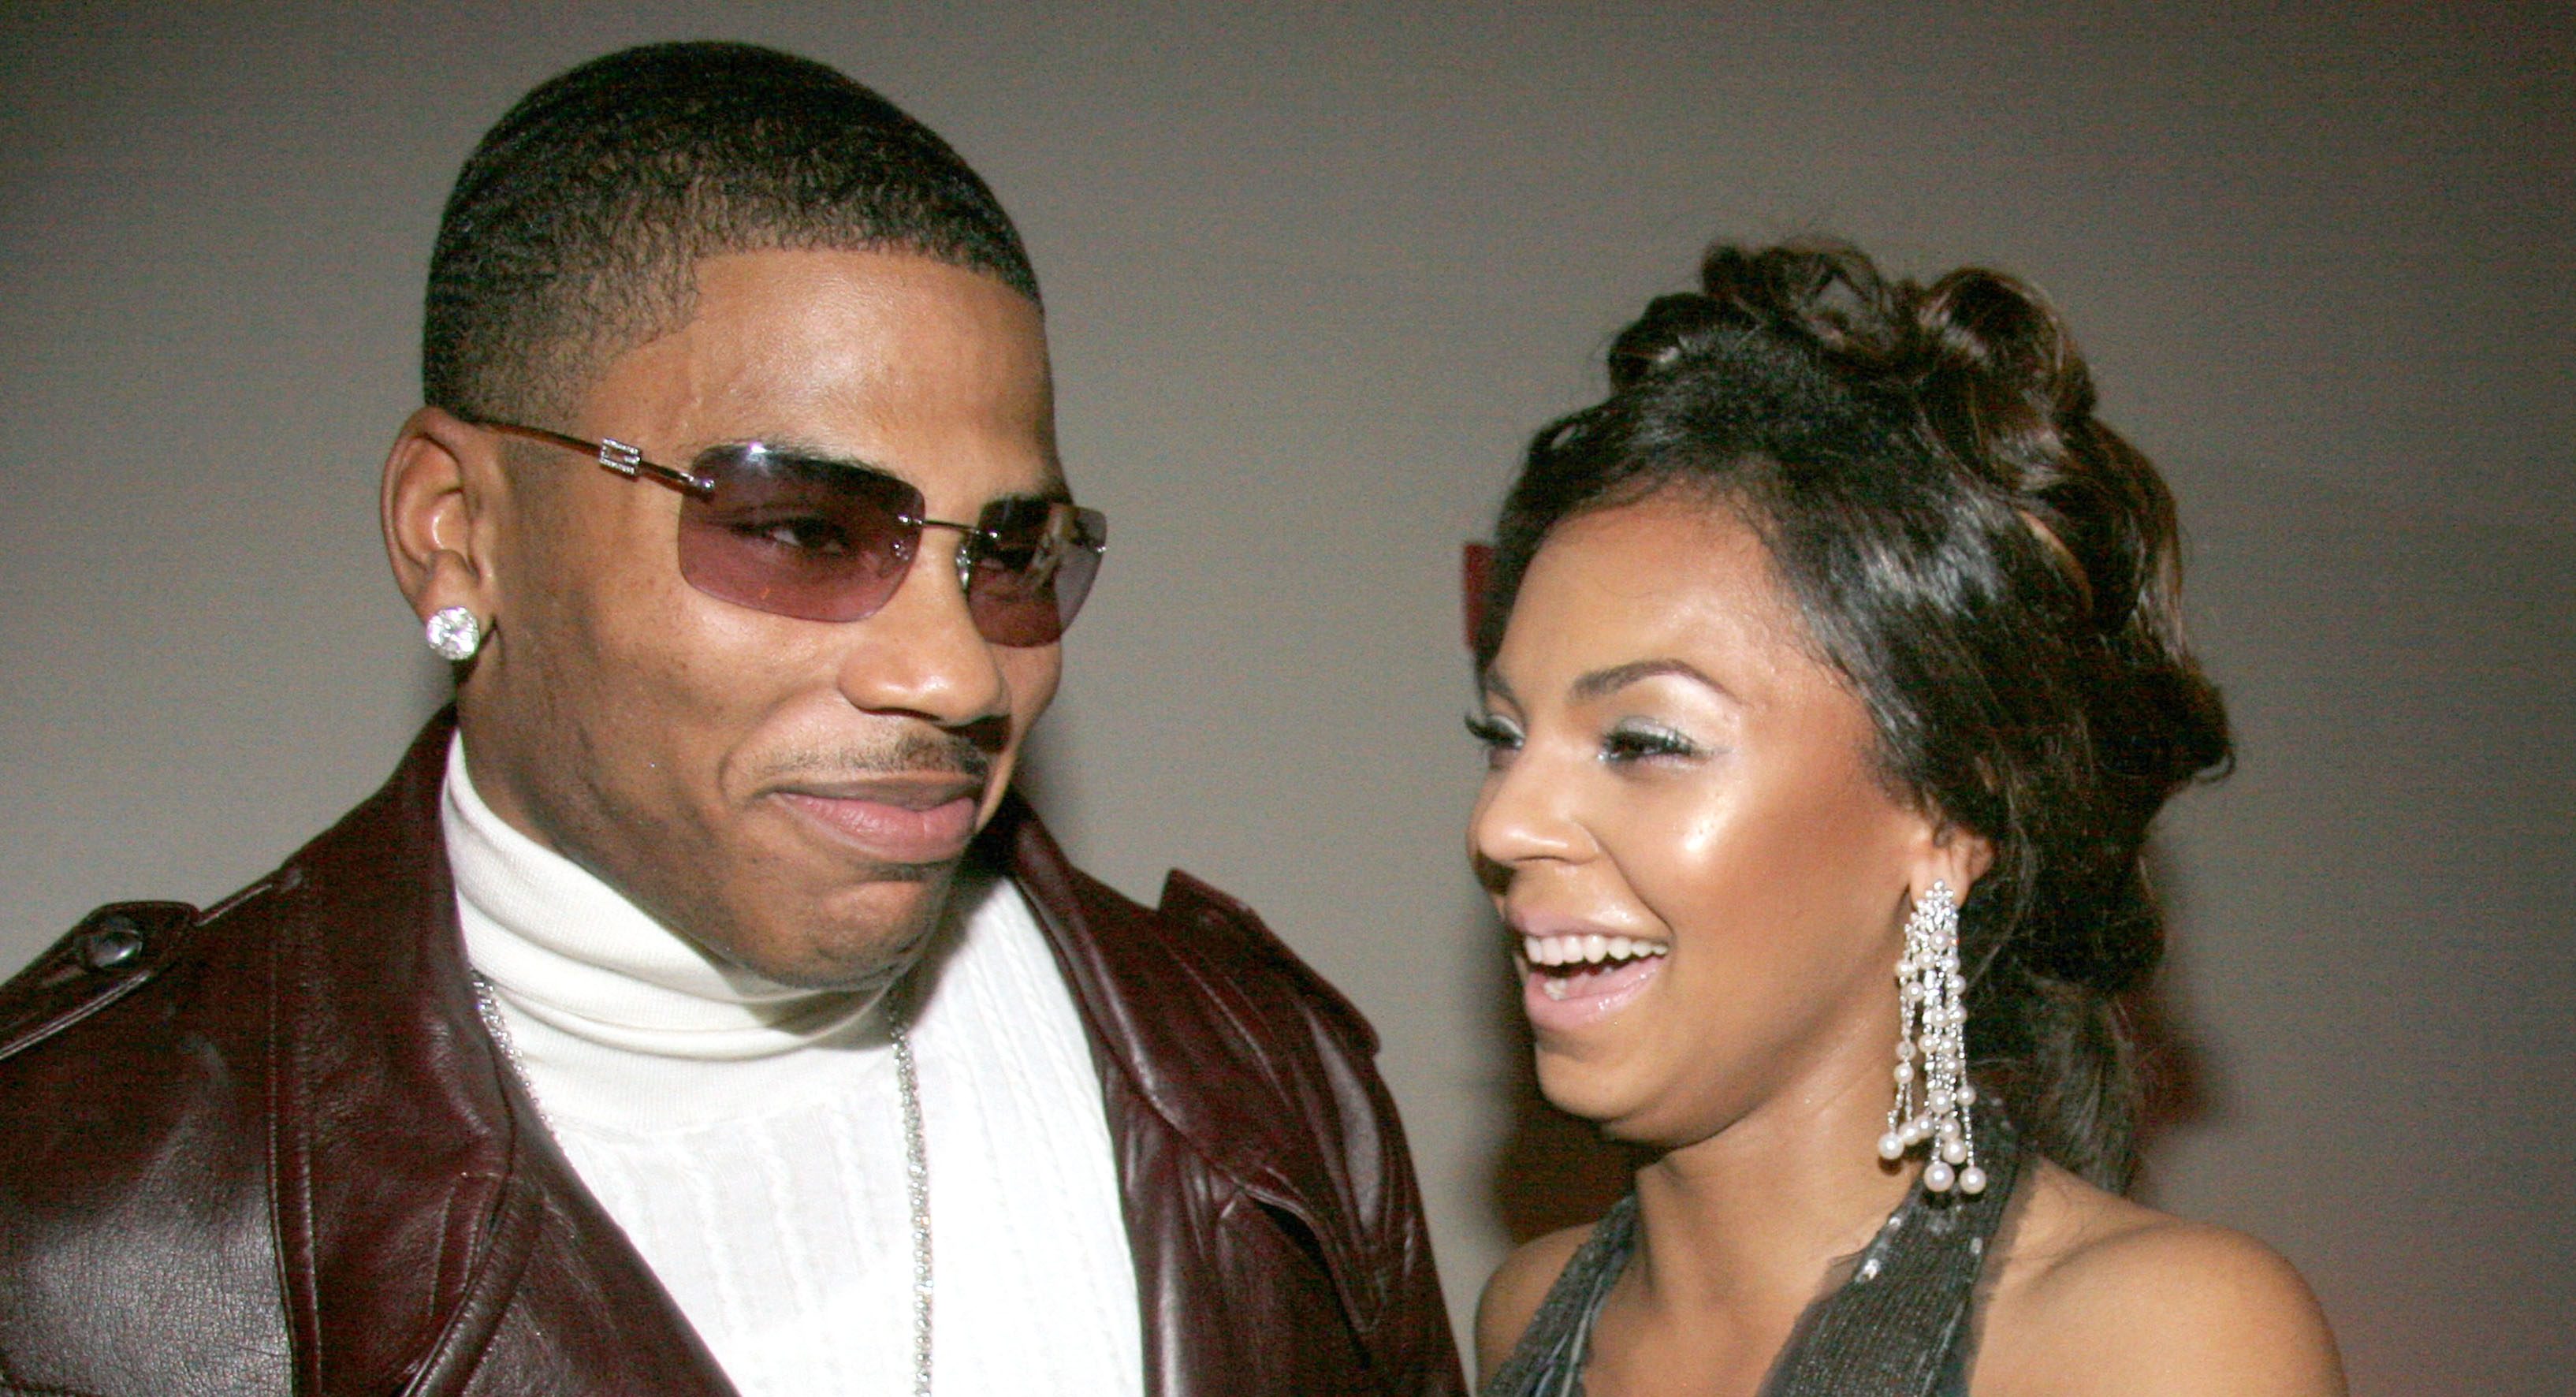 Nelly & Ashanti Are “Very Happy” Together, Sources Say